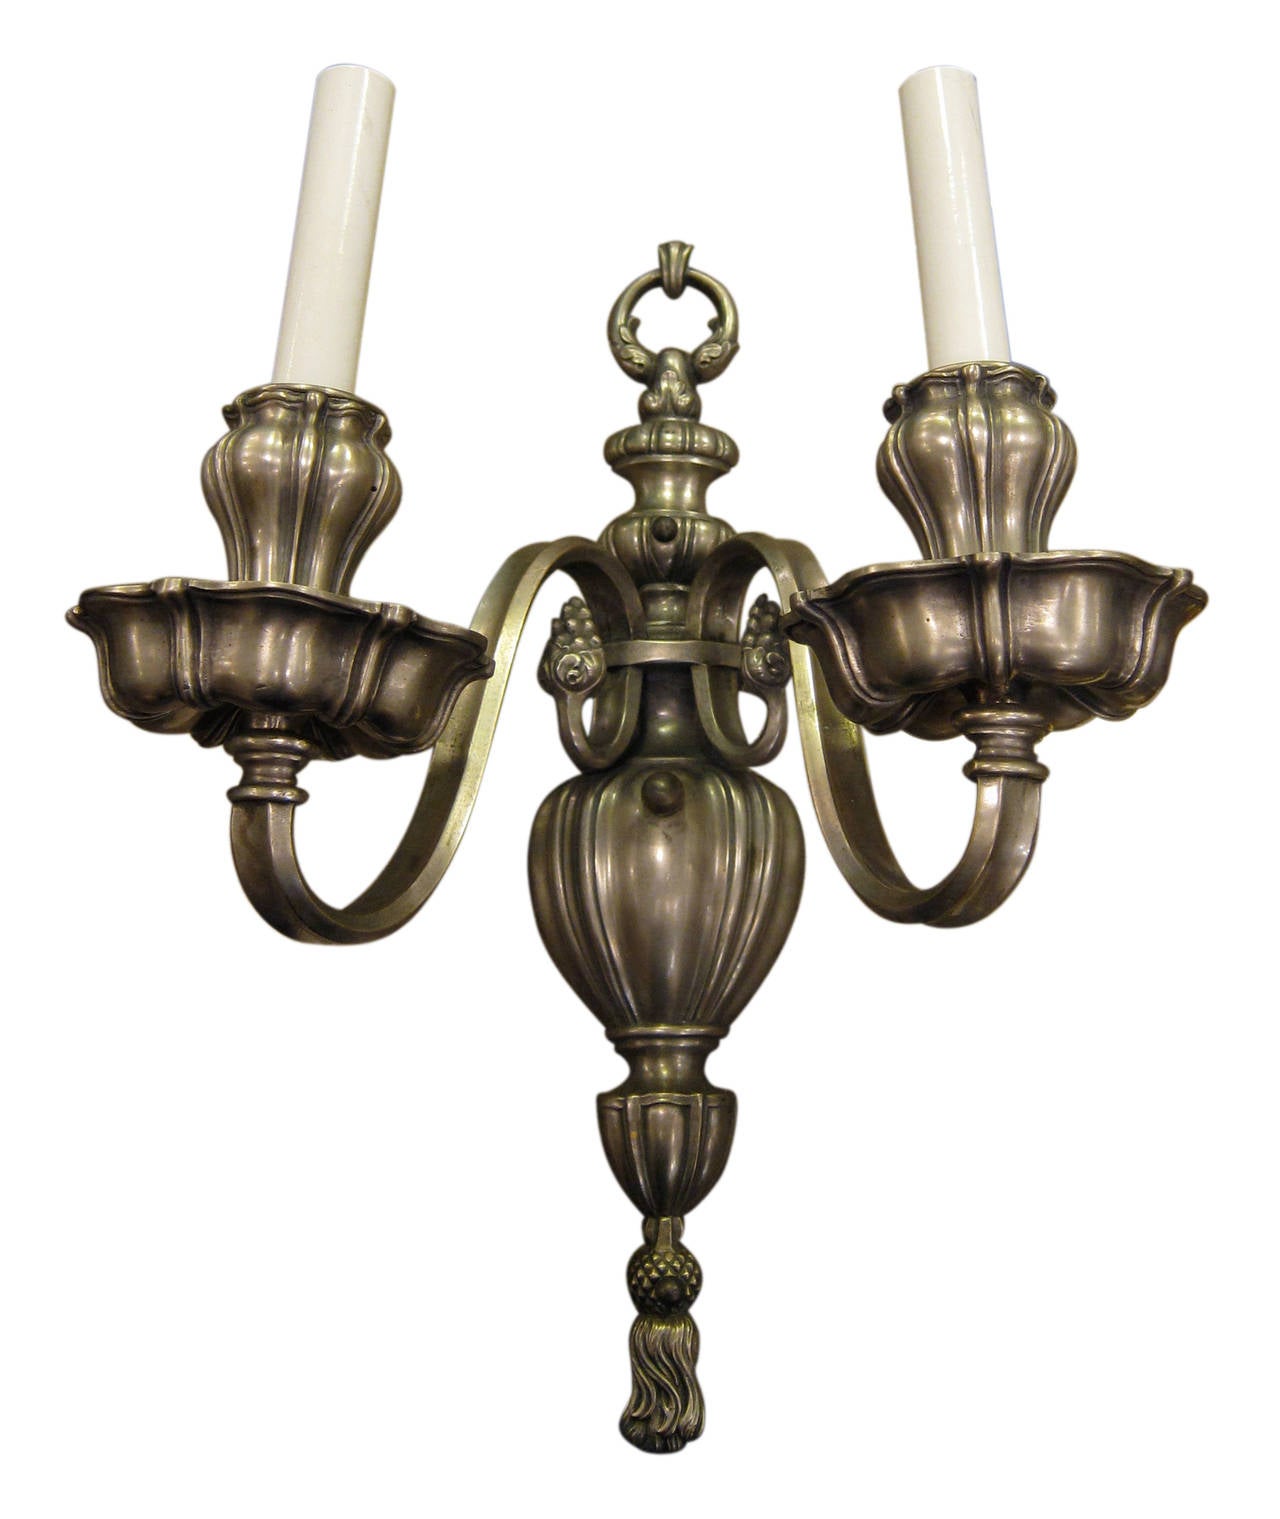 Pair of silver plated two-arm Georgian style sconces by E.F. Caldwell of NY. Cleaned and rewired. Please note, this item is located in one of our NYC locations.